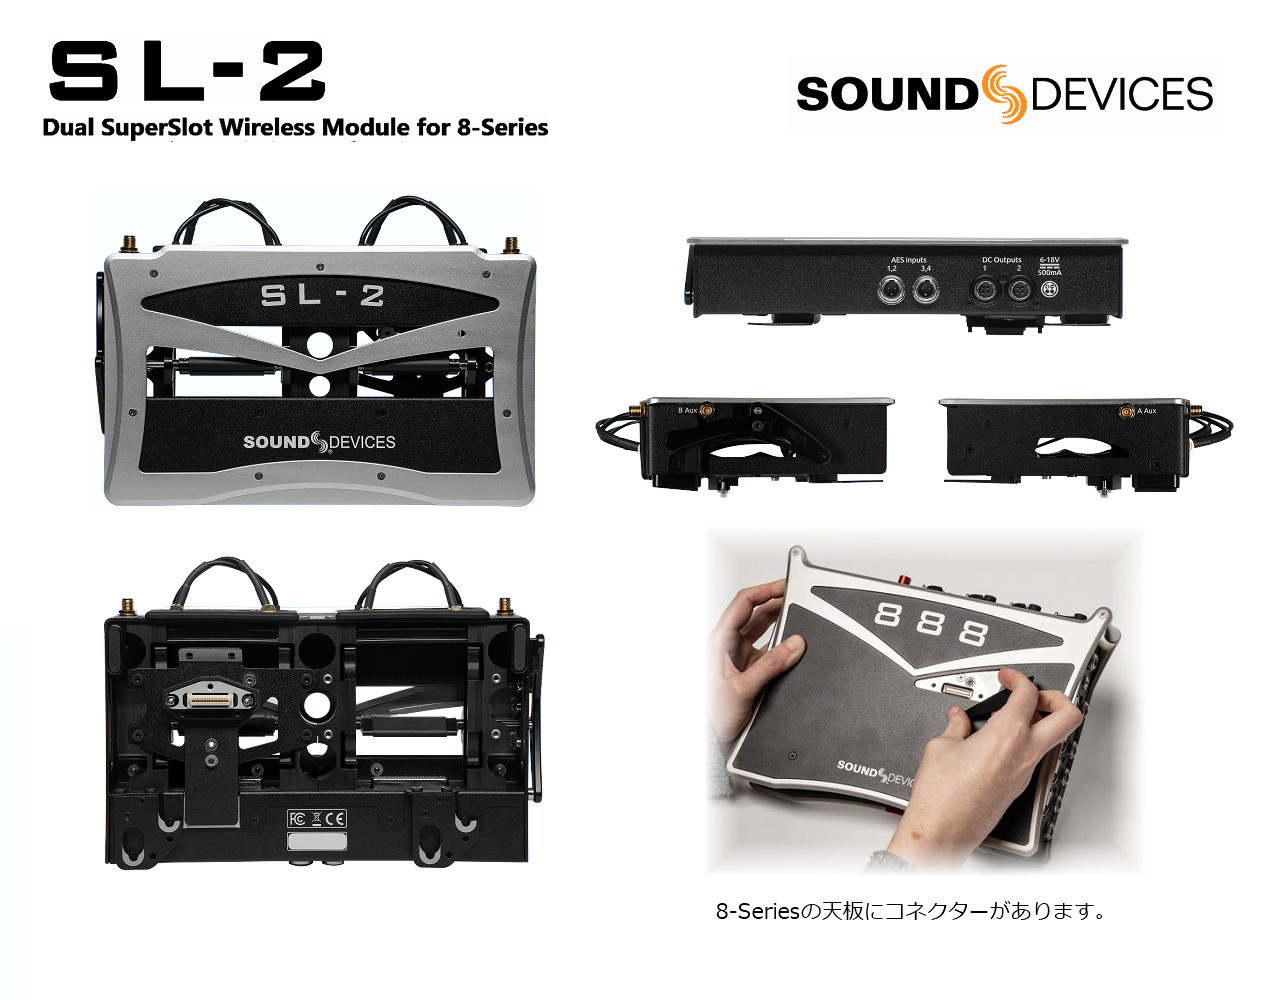 Sound Devices -日本テックトラスト株式会社